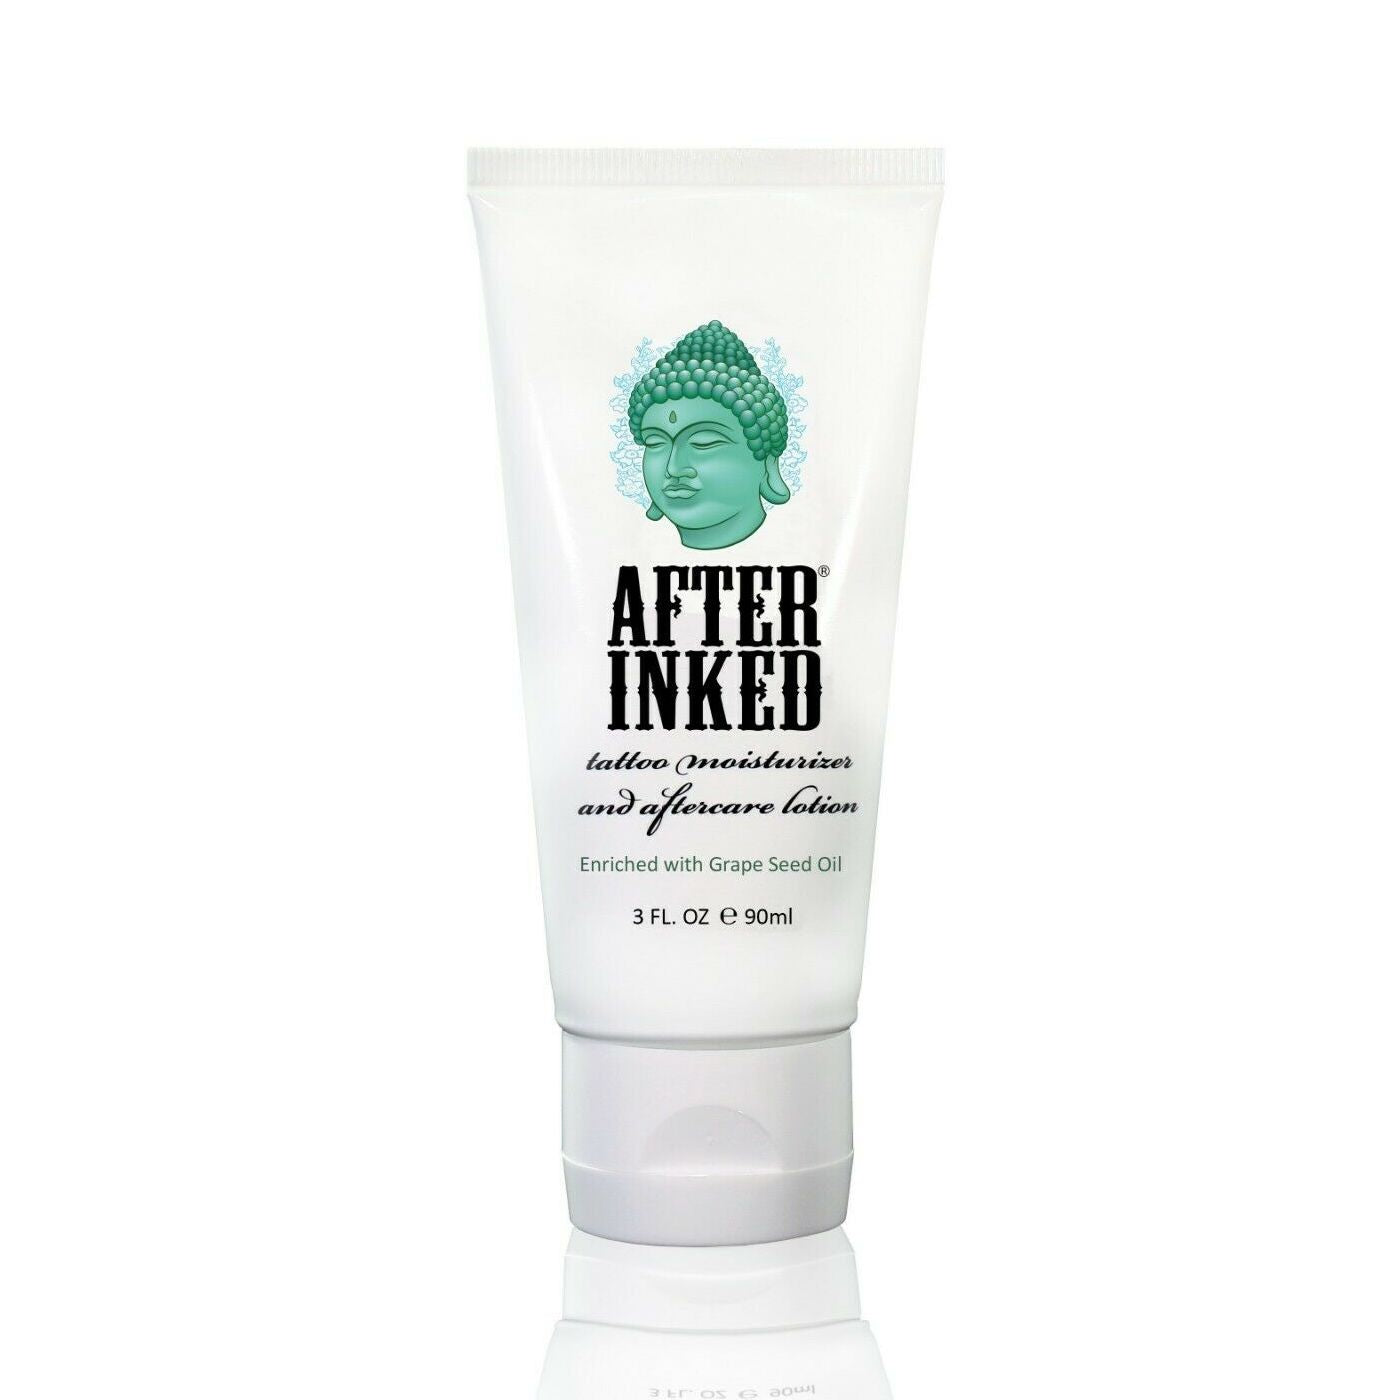 Features:  90 ml (3oz) tube Enriched with grape seed oil Paraben-free / Fragrance-free Non-petroleum based Cruelty-Free & no animal-derived ingredients (Vegan) Clinically tested / Dermatologist tested Non-Allergenic / Non-Irritant Designed to relieve itching due to dry skin Will not stick to your clothes Post Consumer Recycled plastic tube Premium brand used and recommended by world-renowned professional tattoo artists PMU, microblading, SPMU, cosmetic tattoo, balm